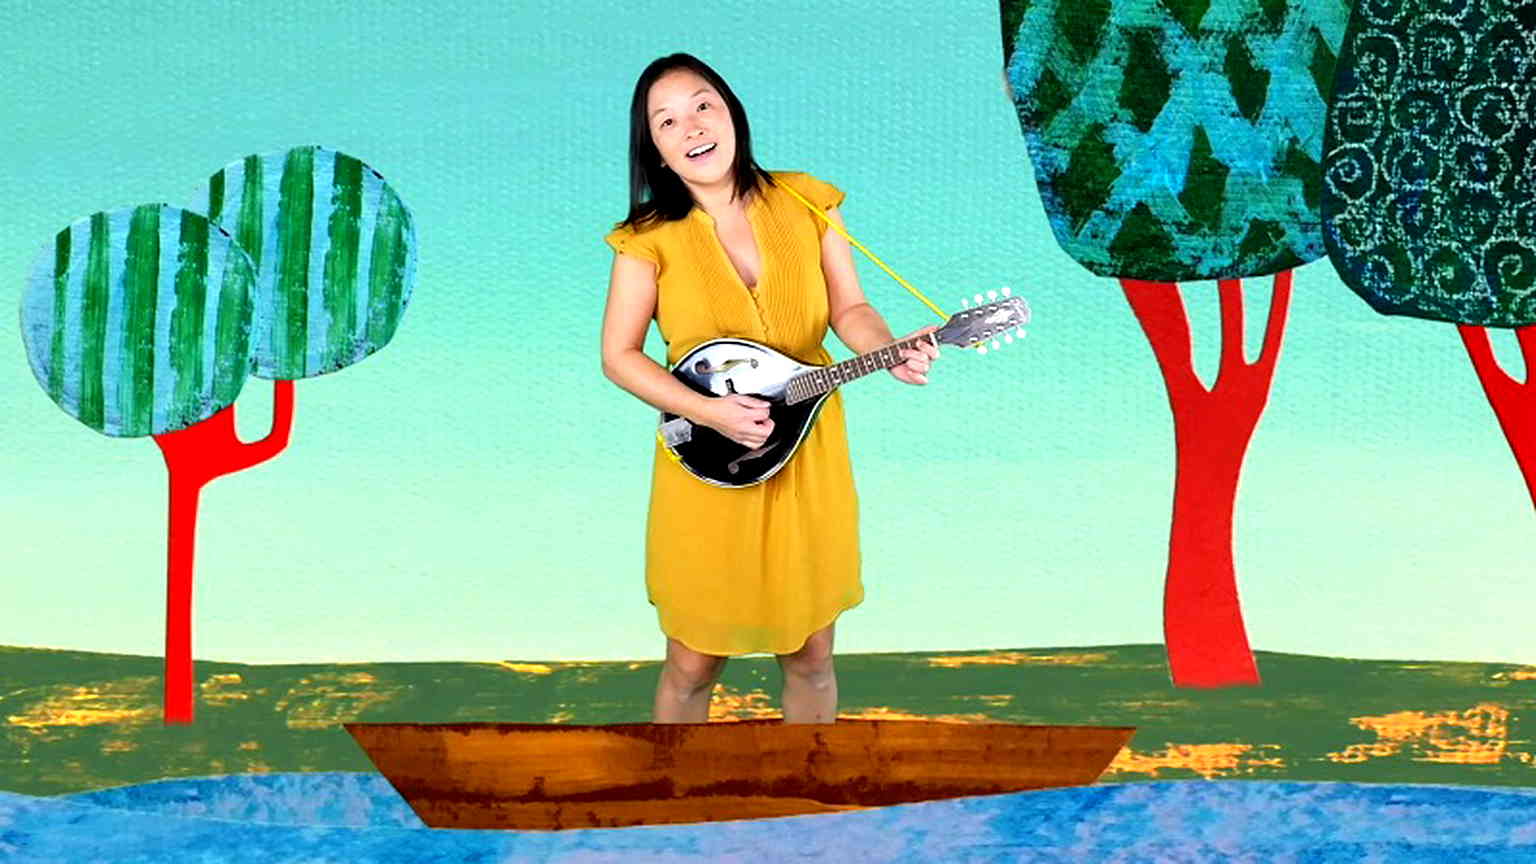 Elena Moon Park is sharing Asian culture through children’s music the whole family can enjoy